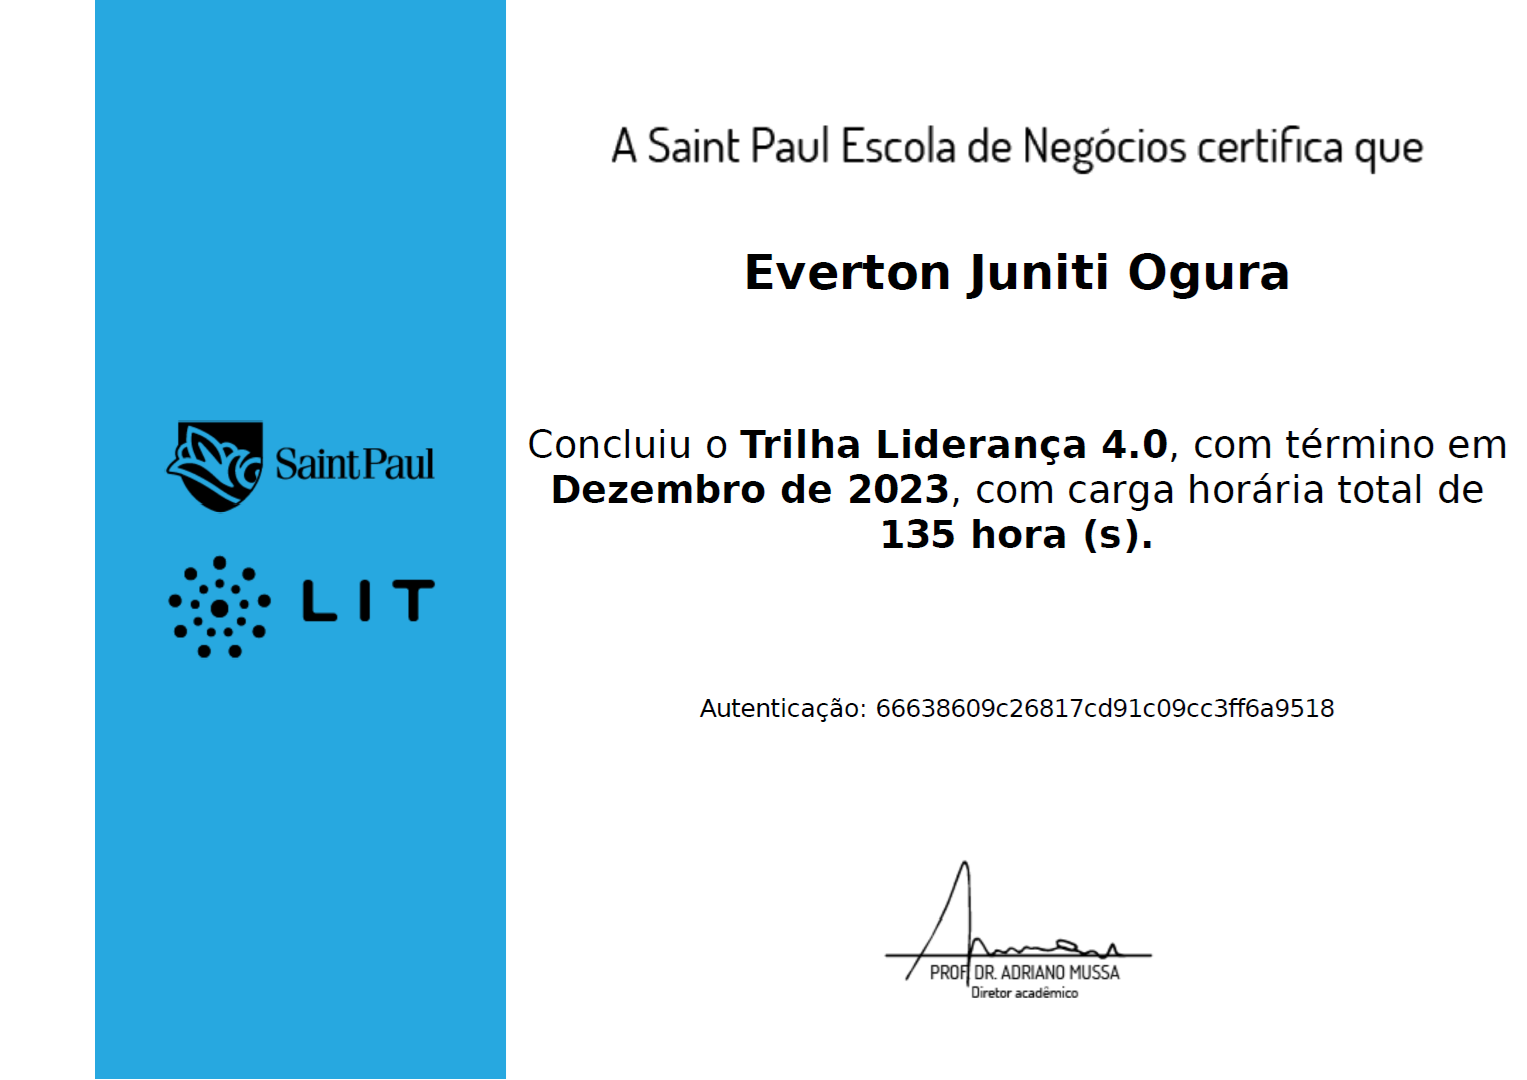 Image of the certificate of completion of the Leadership 4.0 track by Saint Paul Escola de Negócios